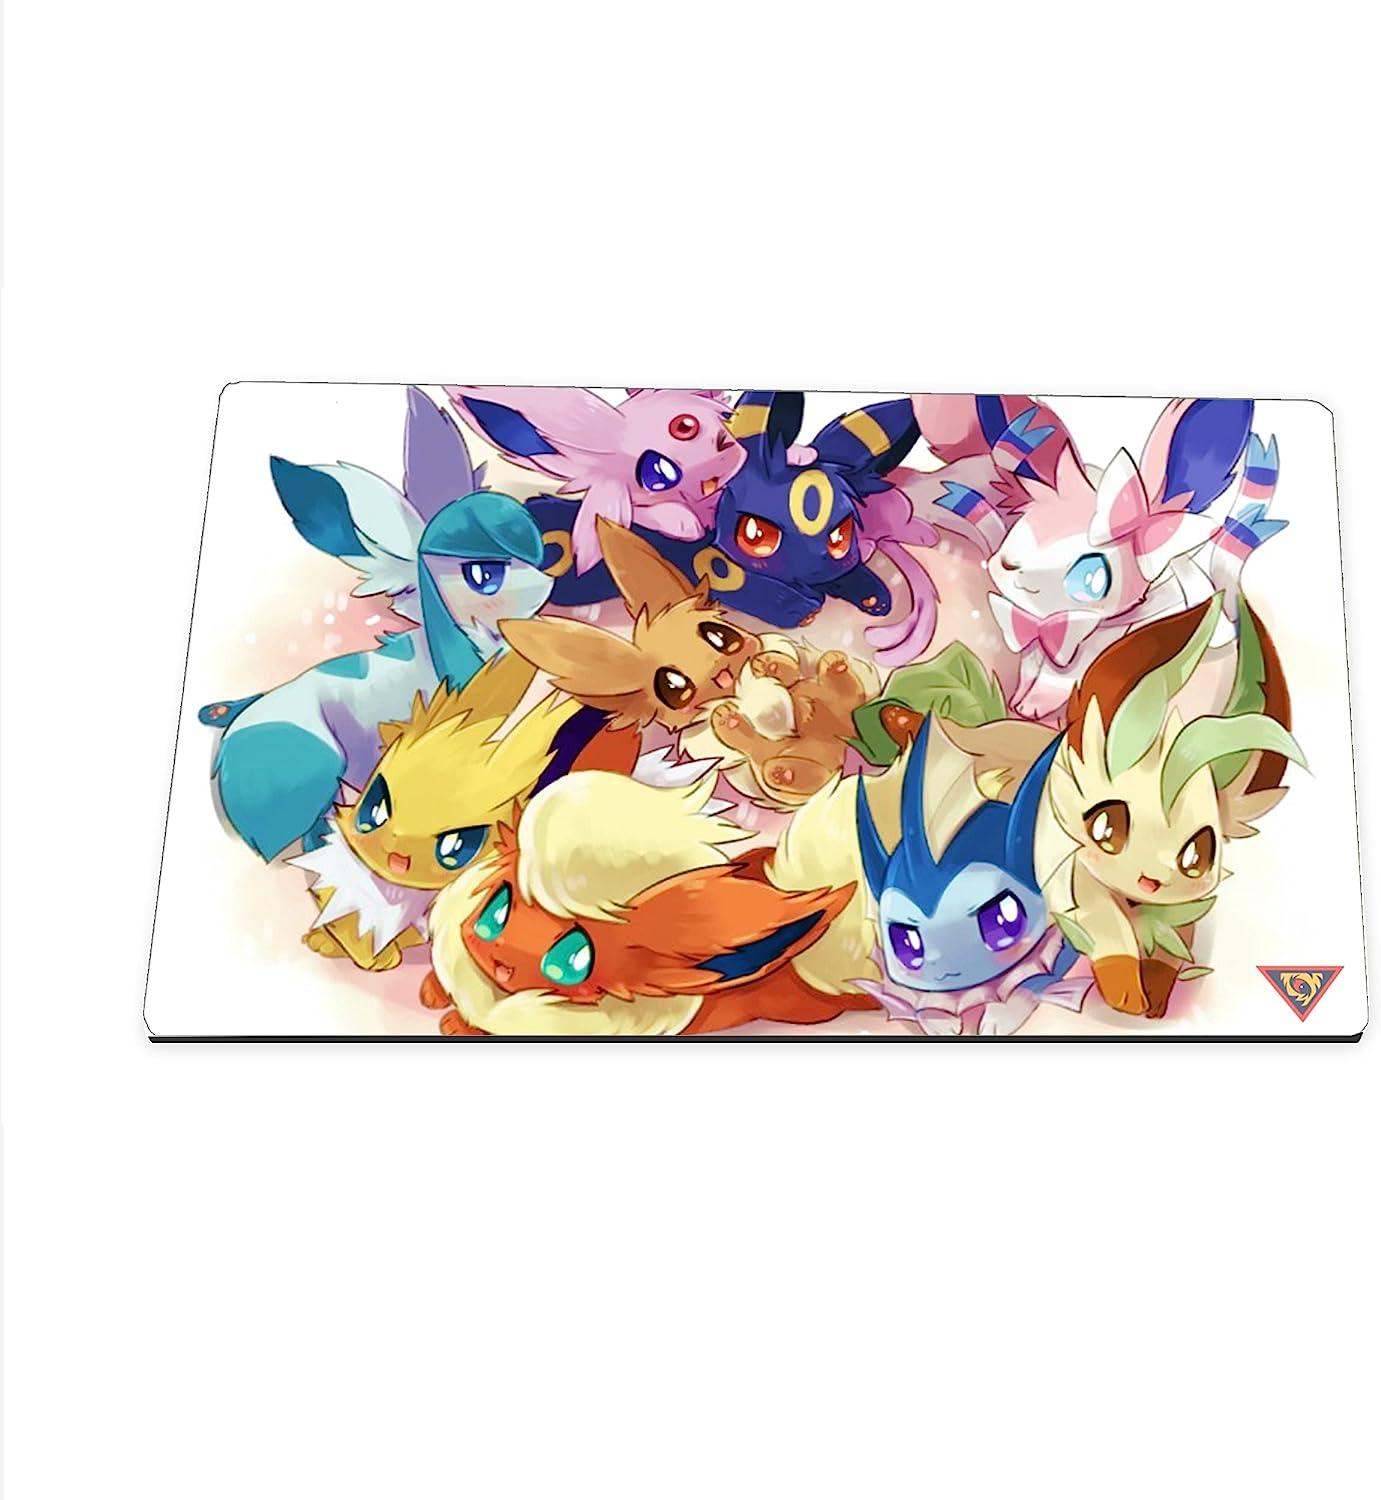 Grupo Erik Pokemon Eevee Evolutions Poster - 35.8 x 24.2 inches / 91 x 61.5  cm - Shipped Rolled Up - Pokemon Poster - Cool Posters - Art Poster 